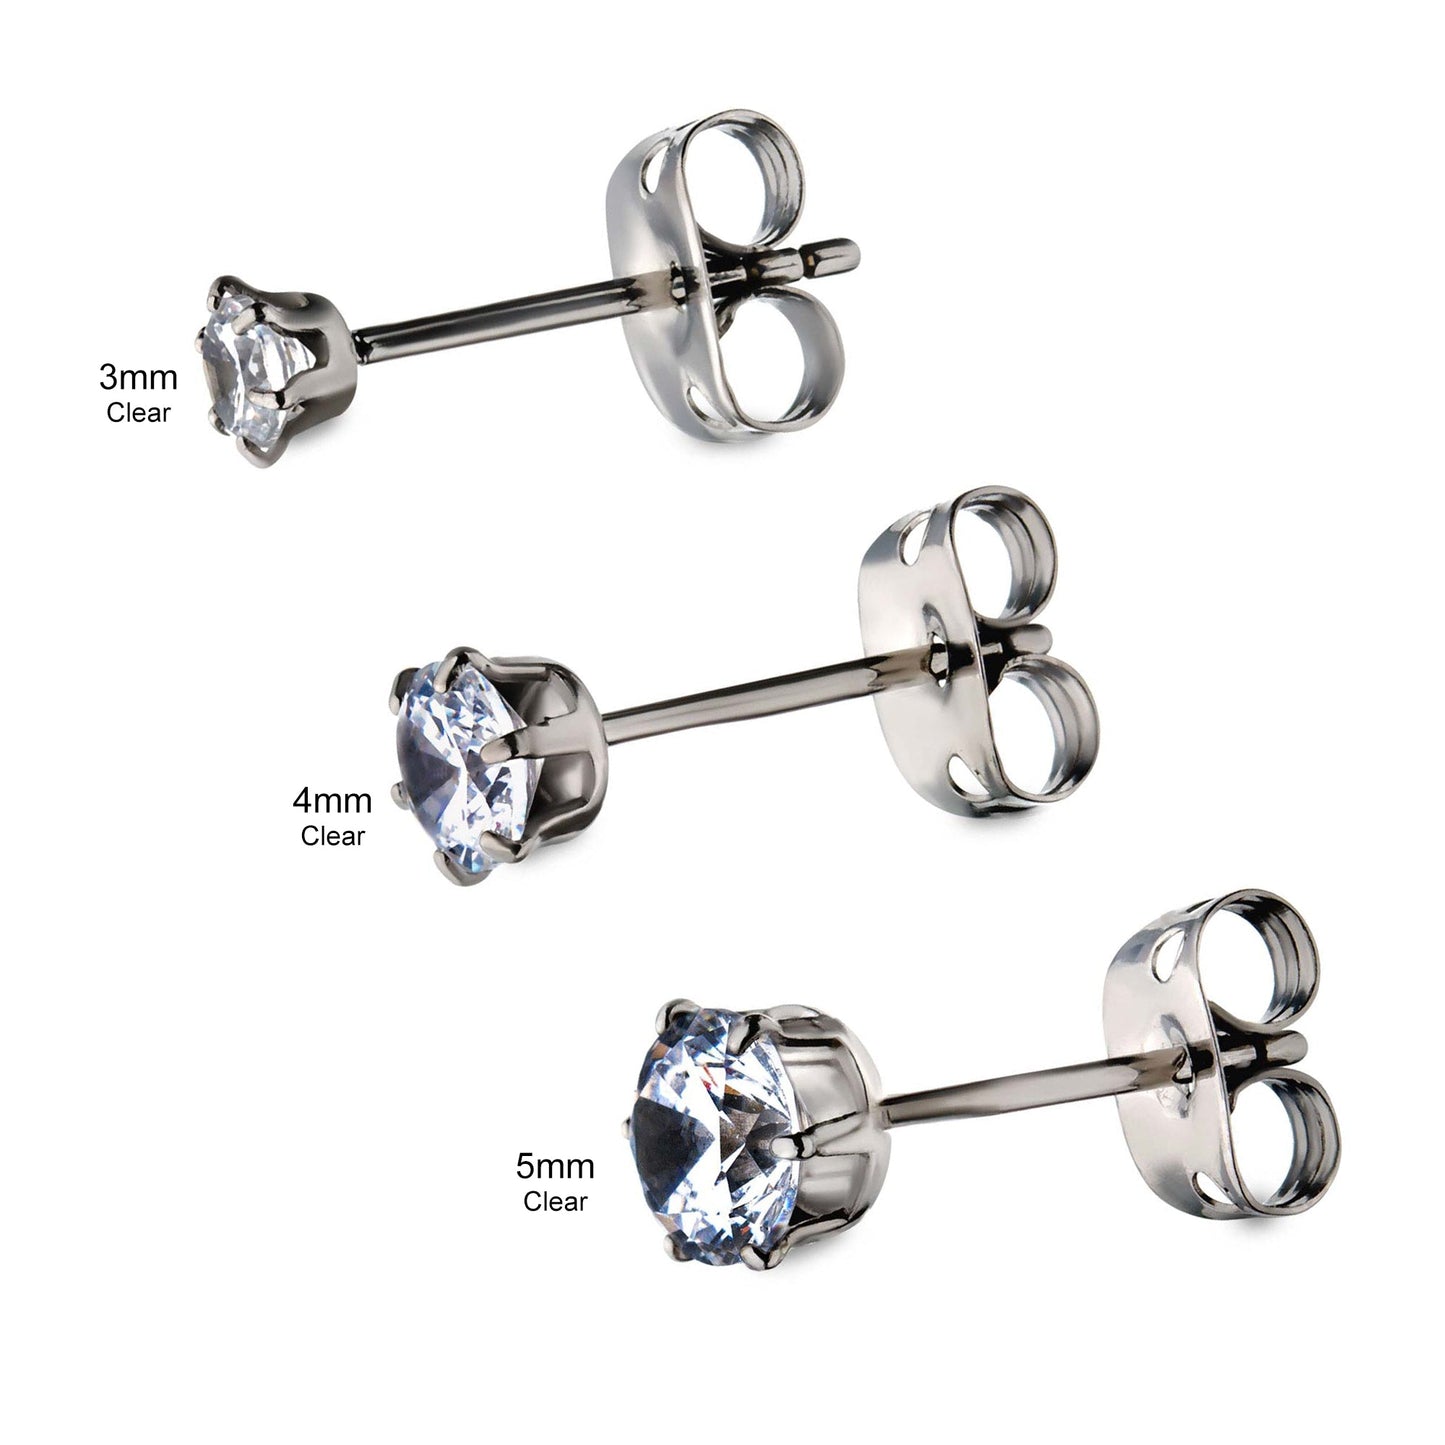 Invictus Prong Set Earring (Pair)